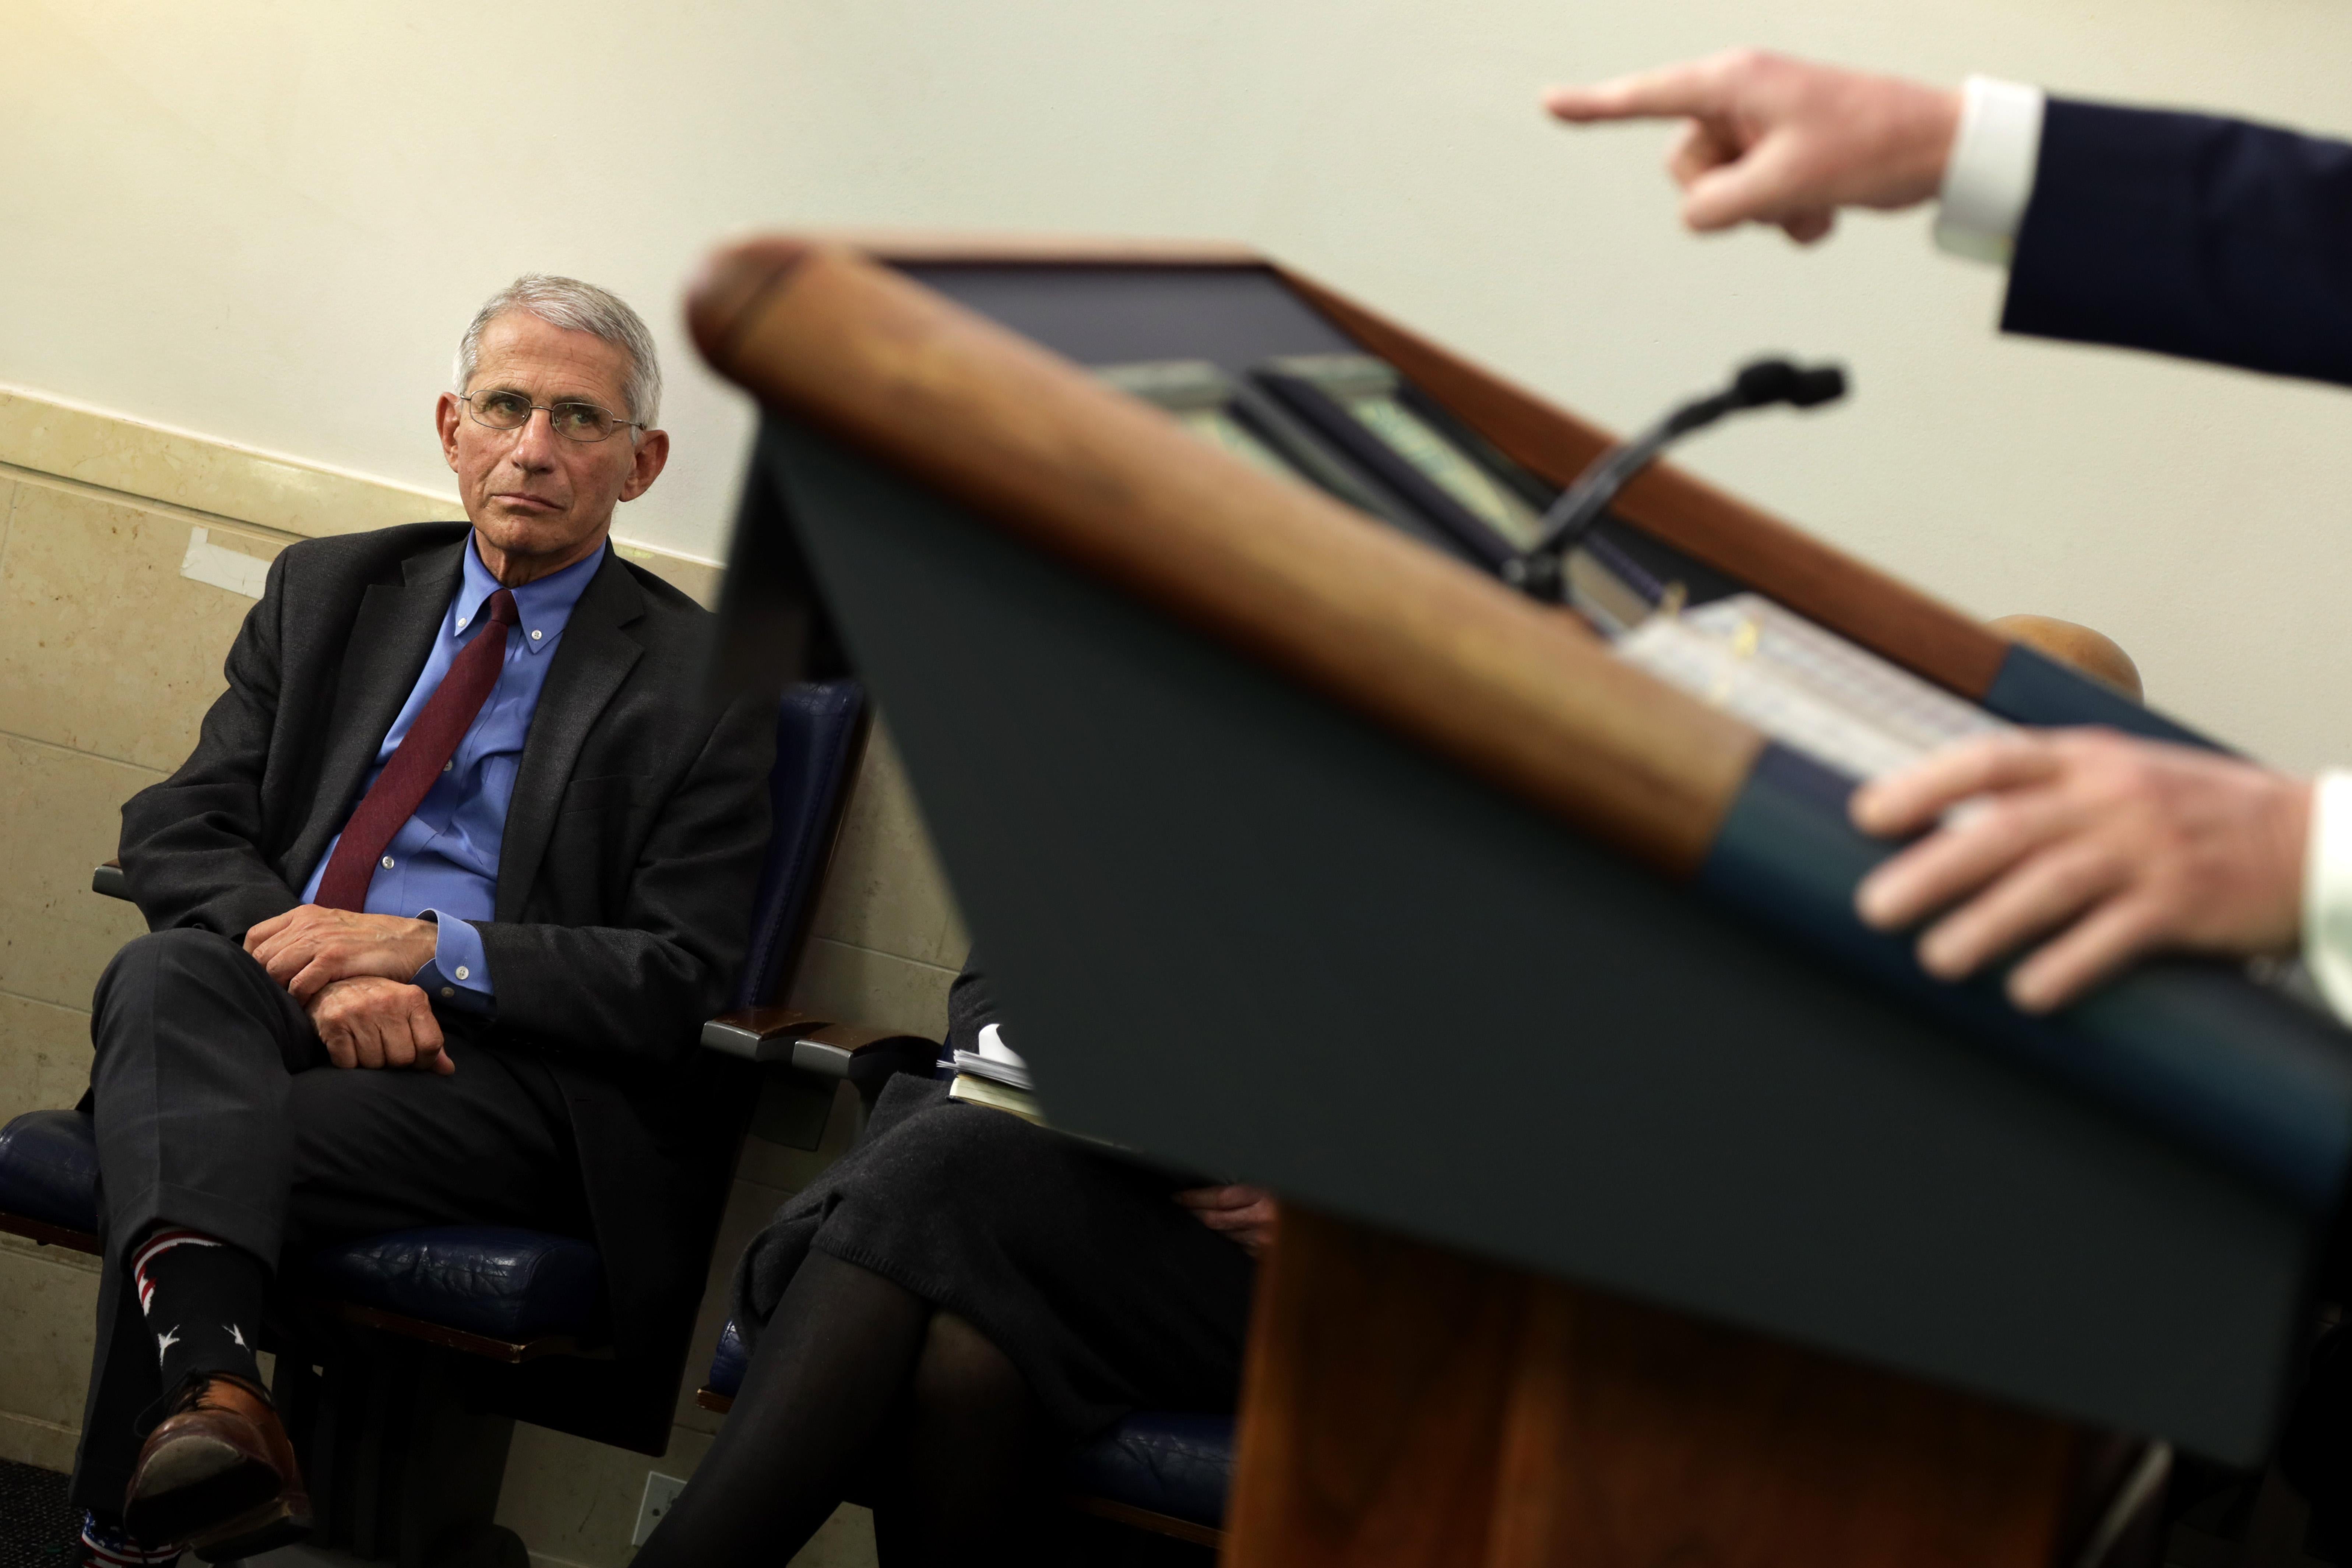 Fauci sits in a chair and watches as Trump stands at the podium, pointing toward the audience